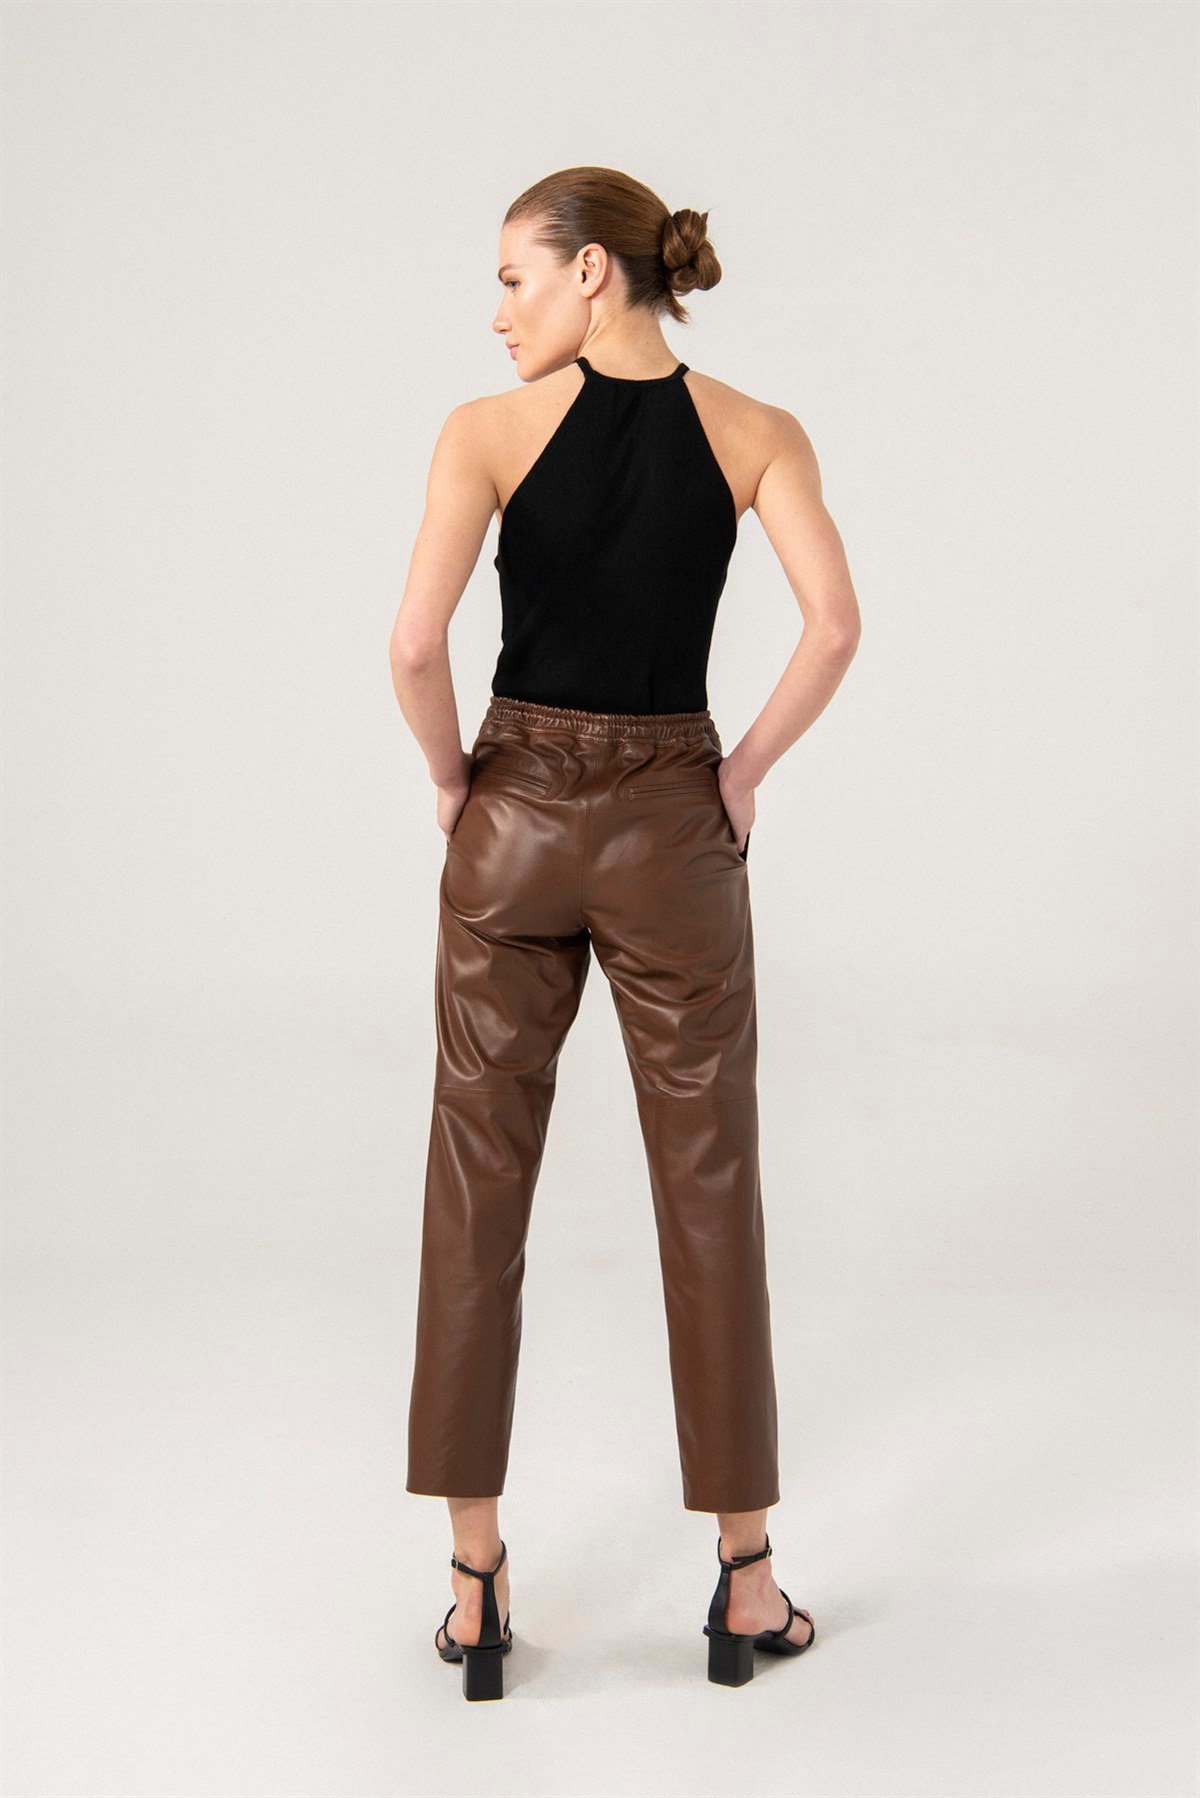 Green Sport Leather Pants